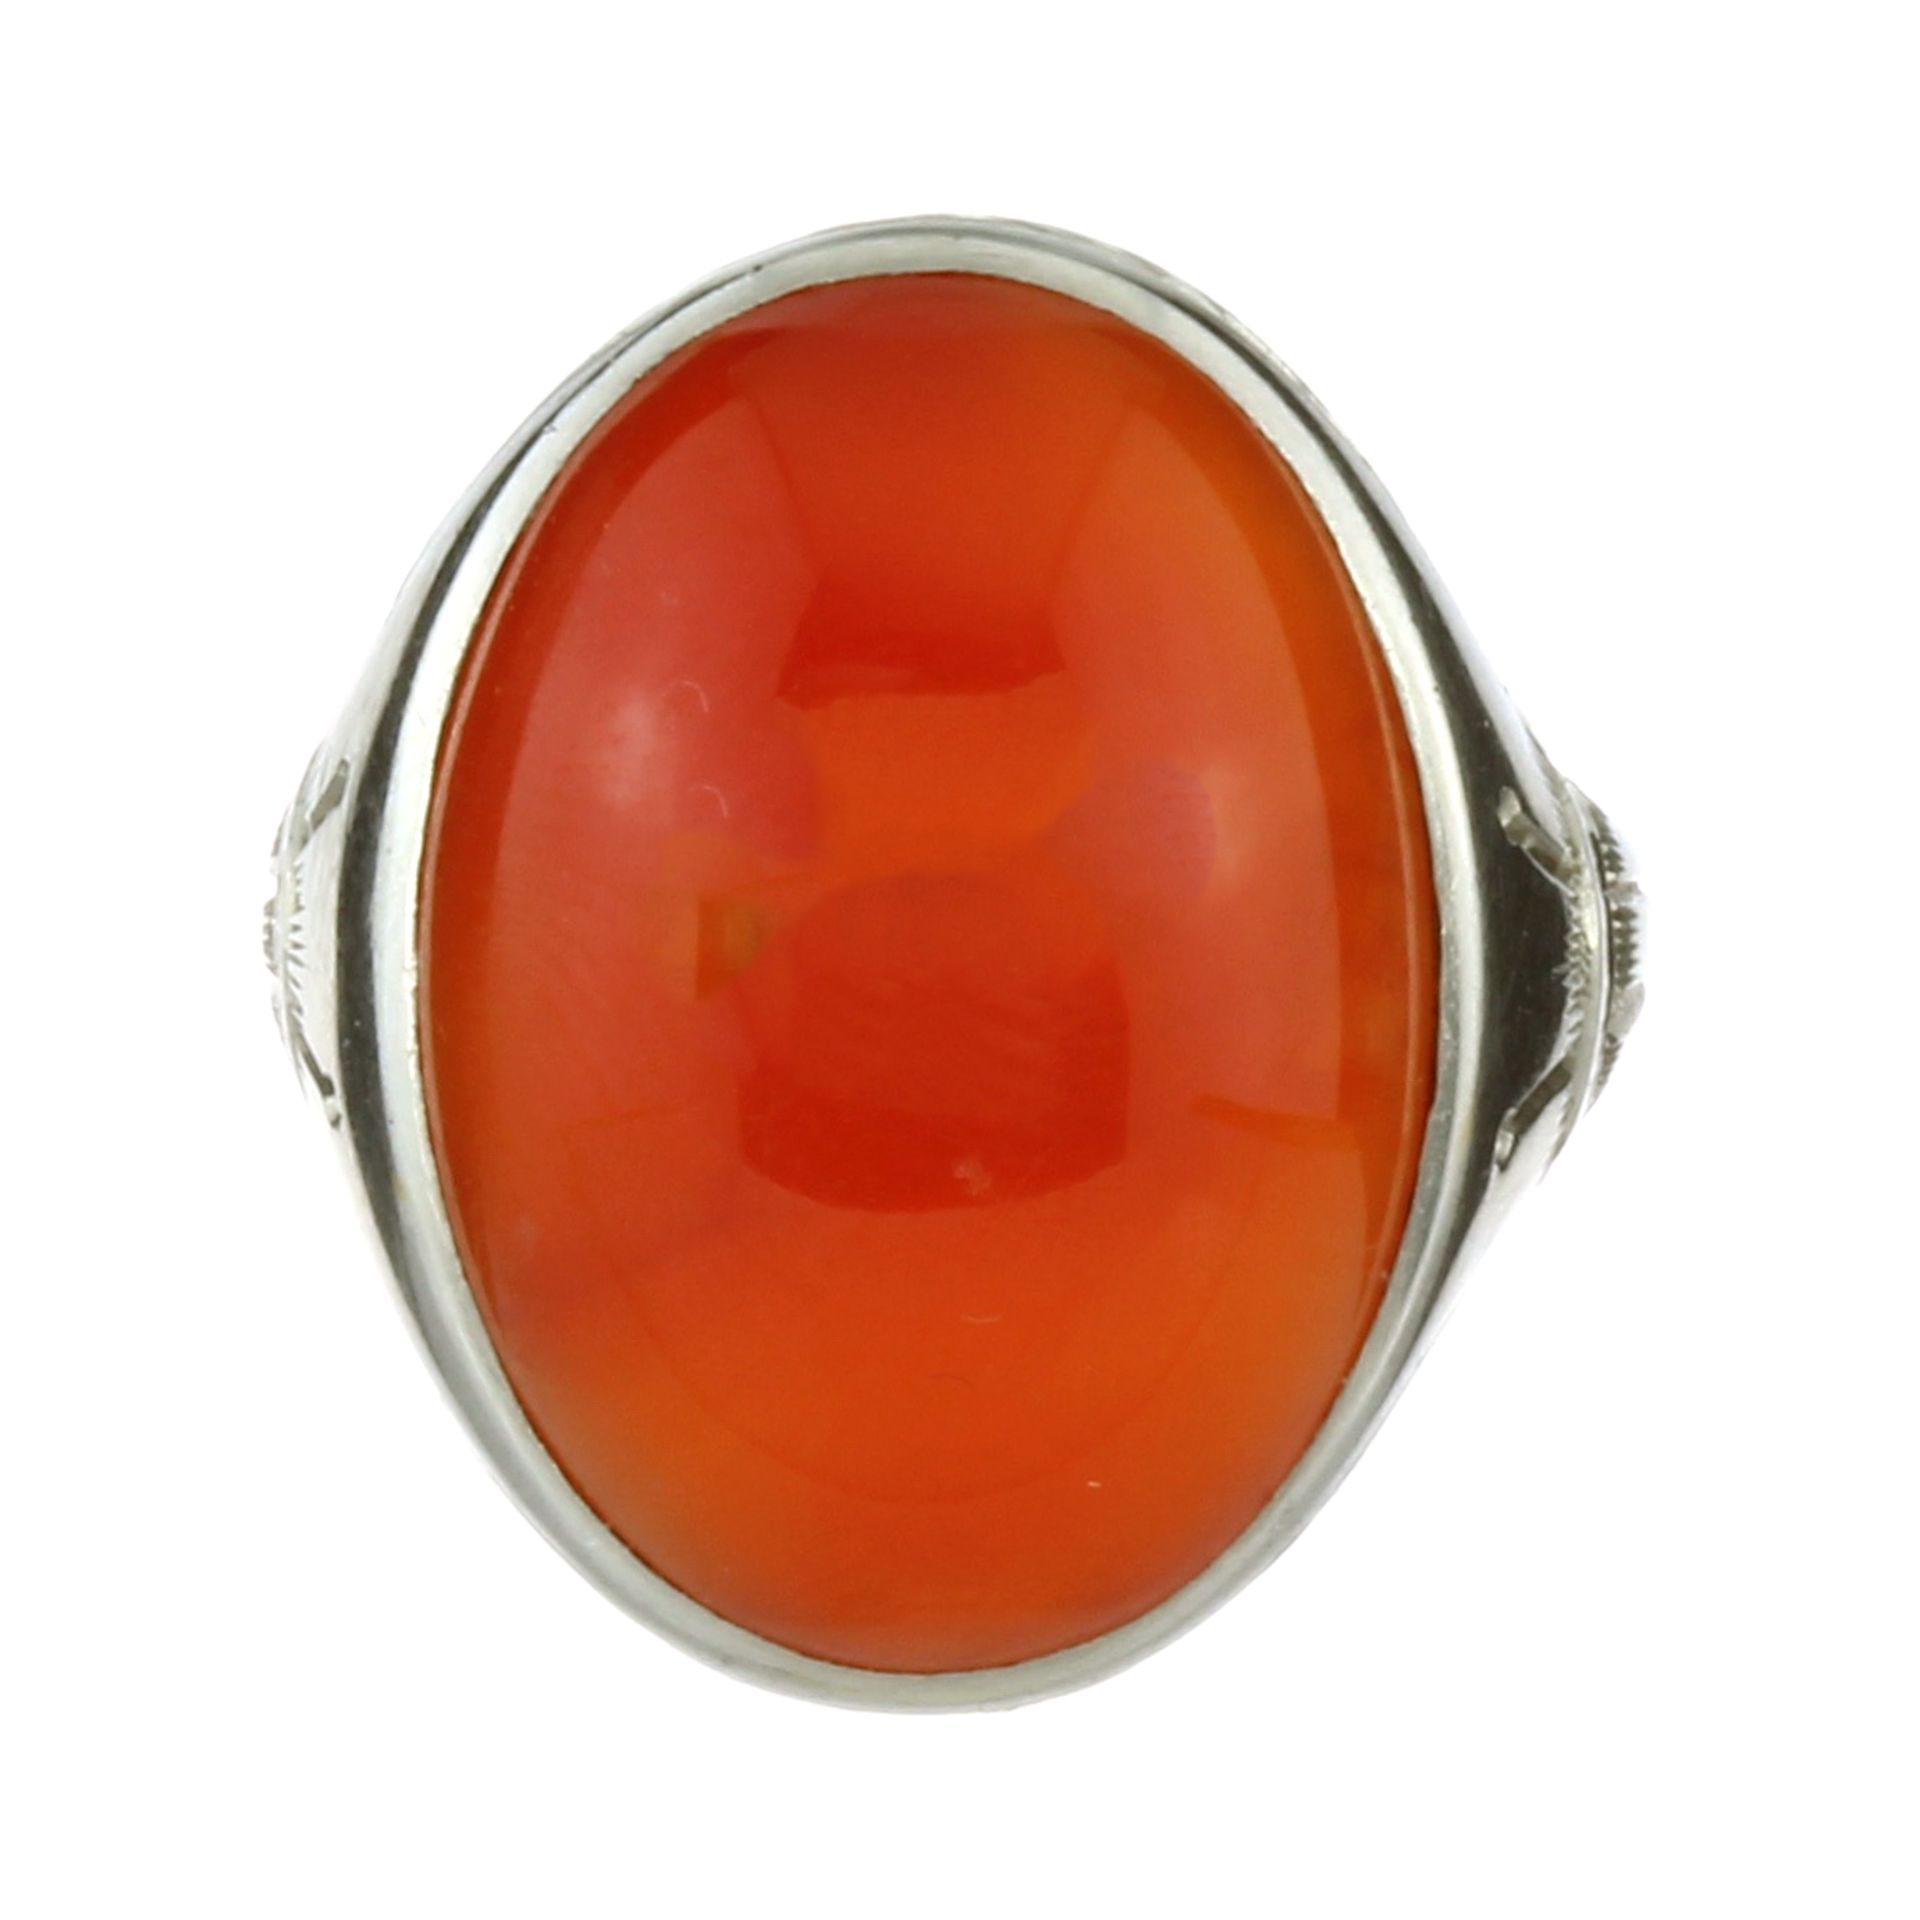 AN ANTIQUE CARNELIAN RING in 18ct white gold set with a large oval carnelian cabochon of 9.55 carats